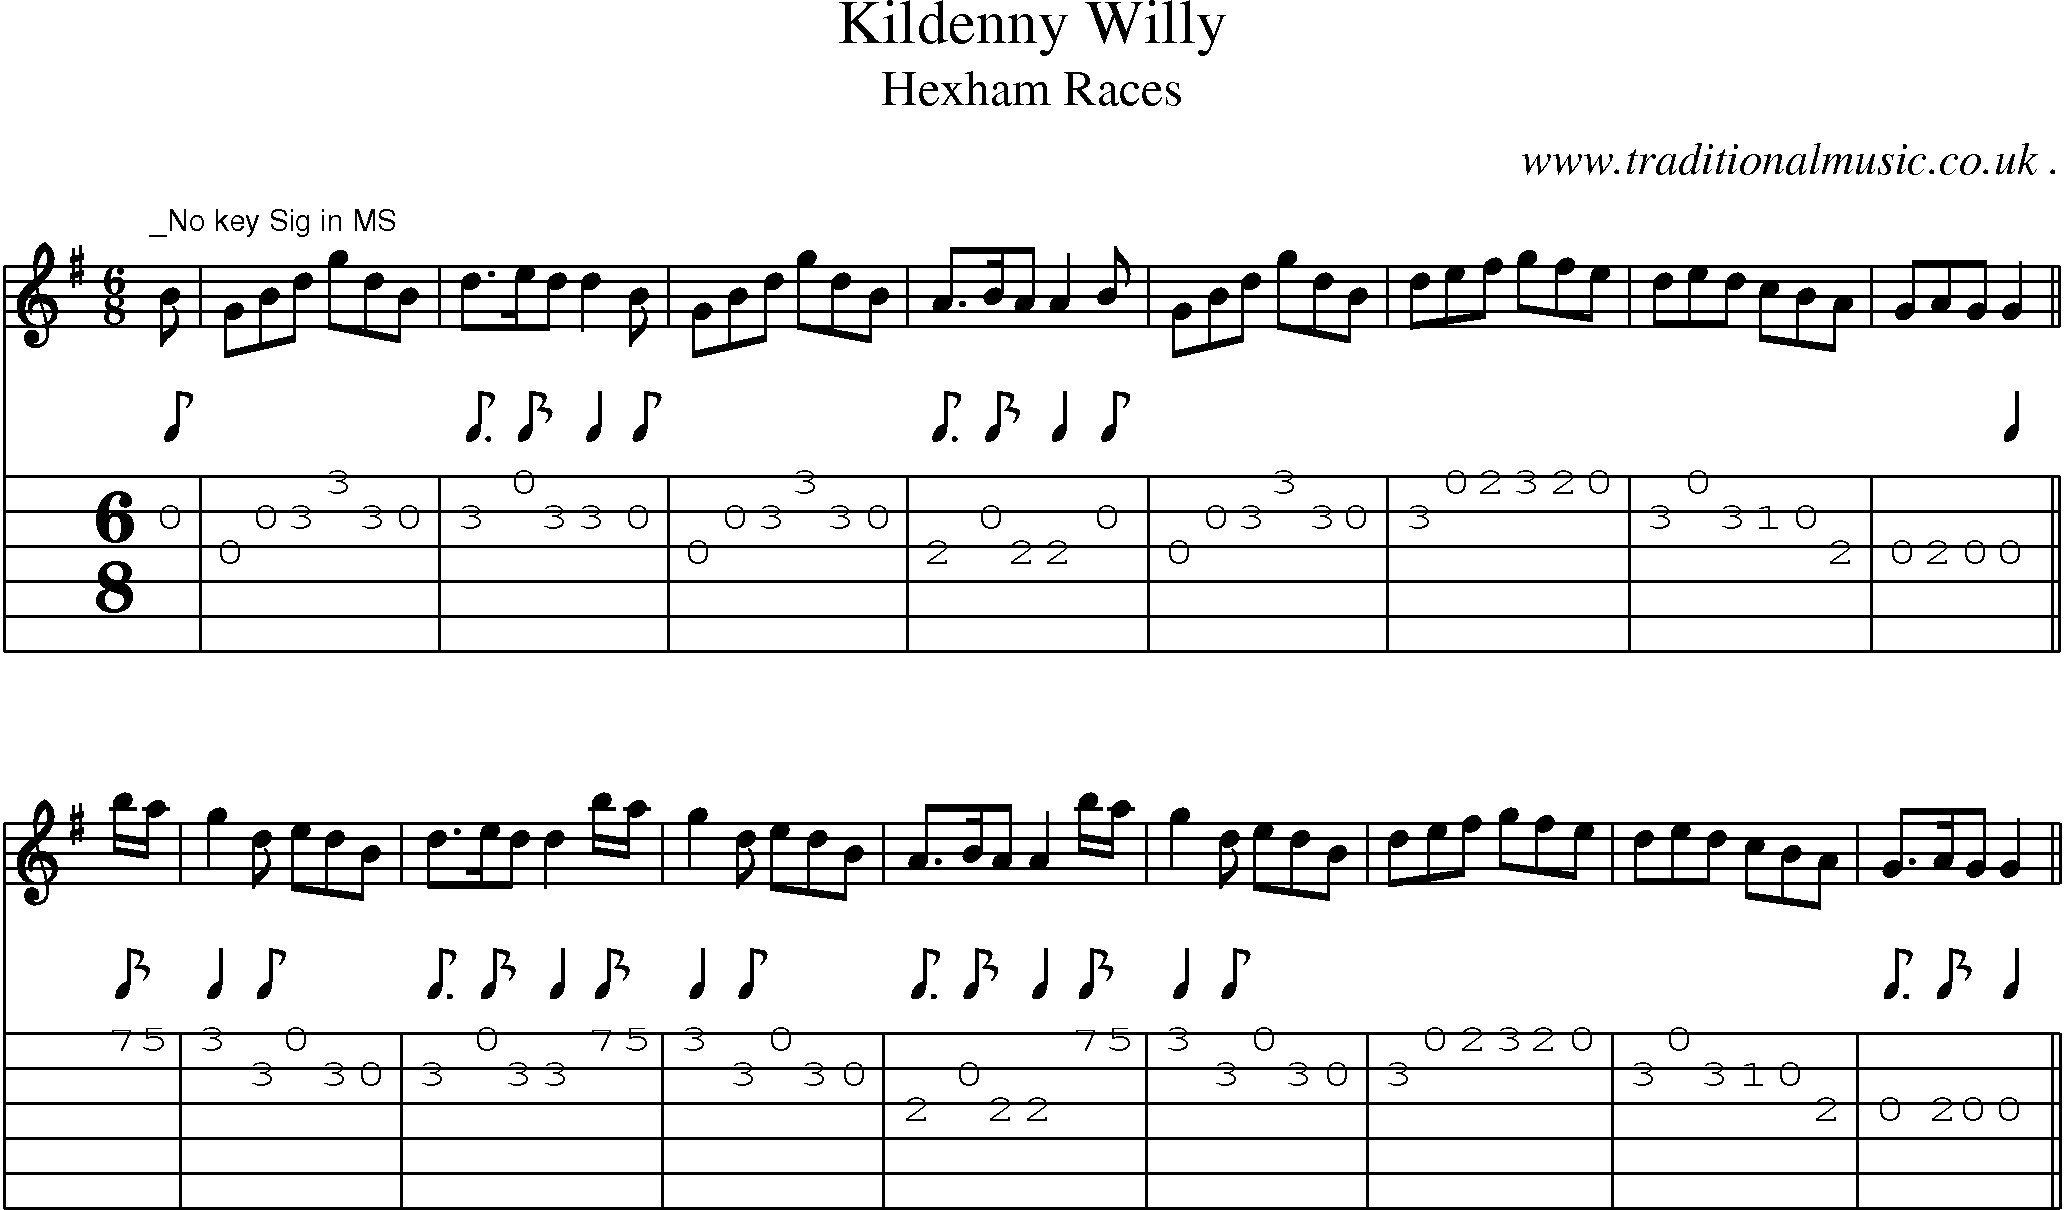 Sheet-Music and Guitar Tabs for Kildenny Willy